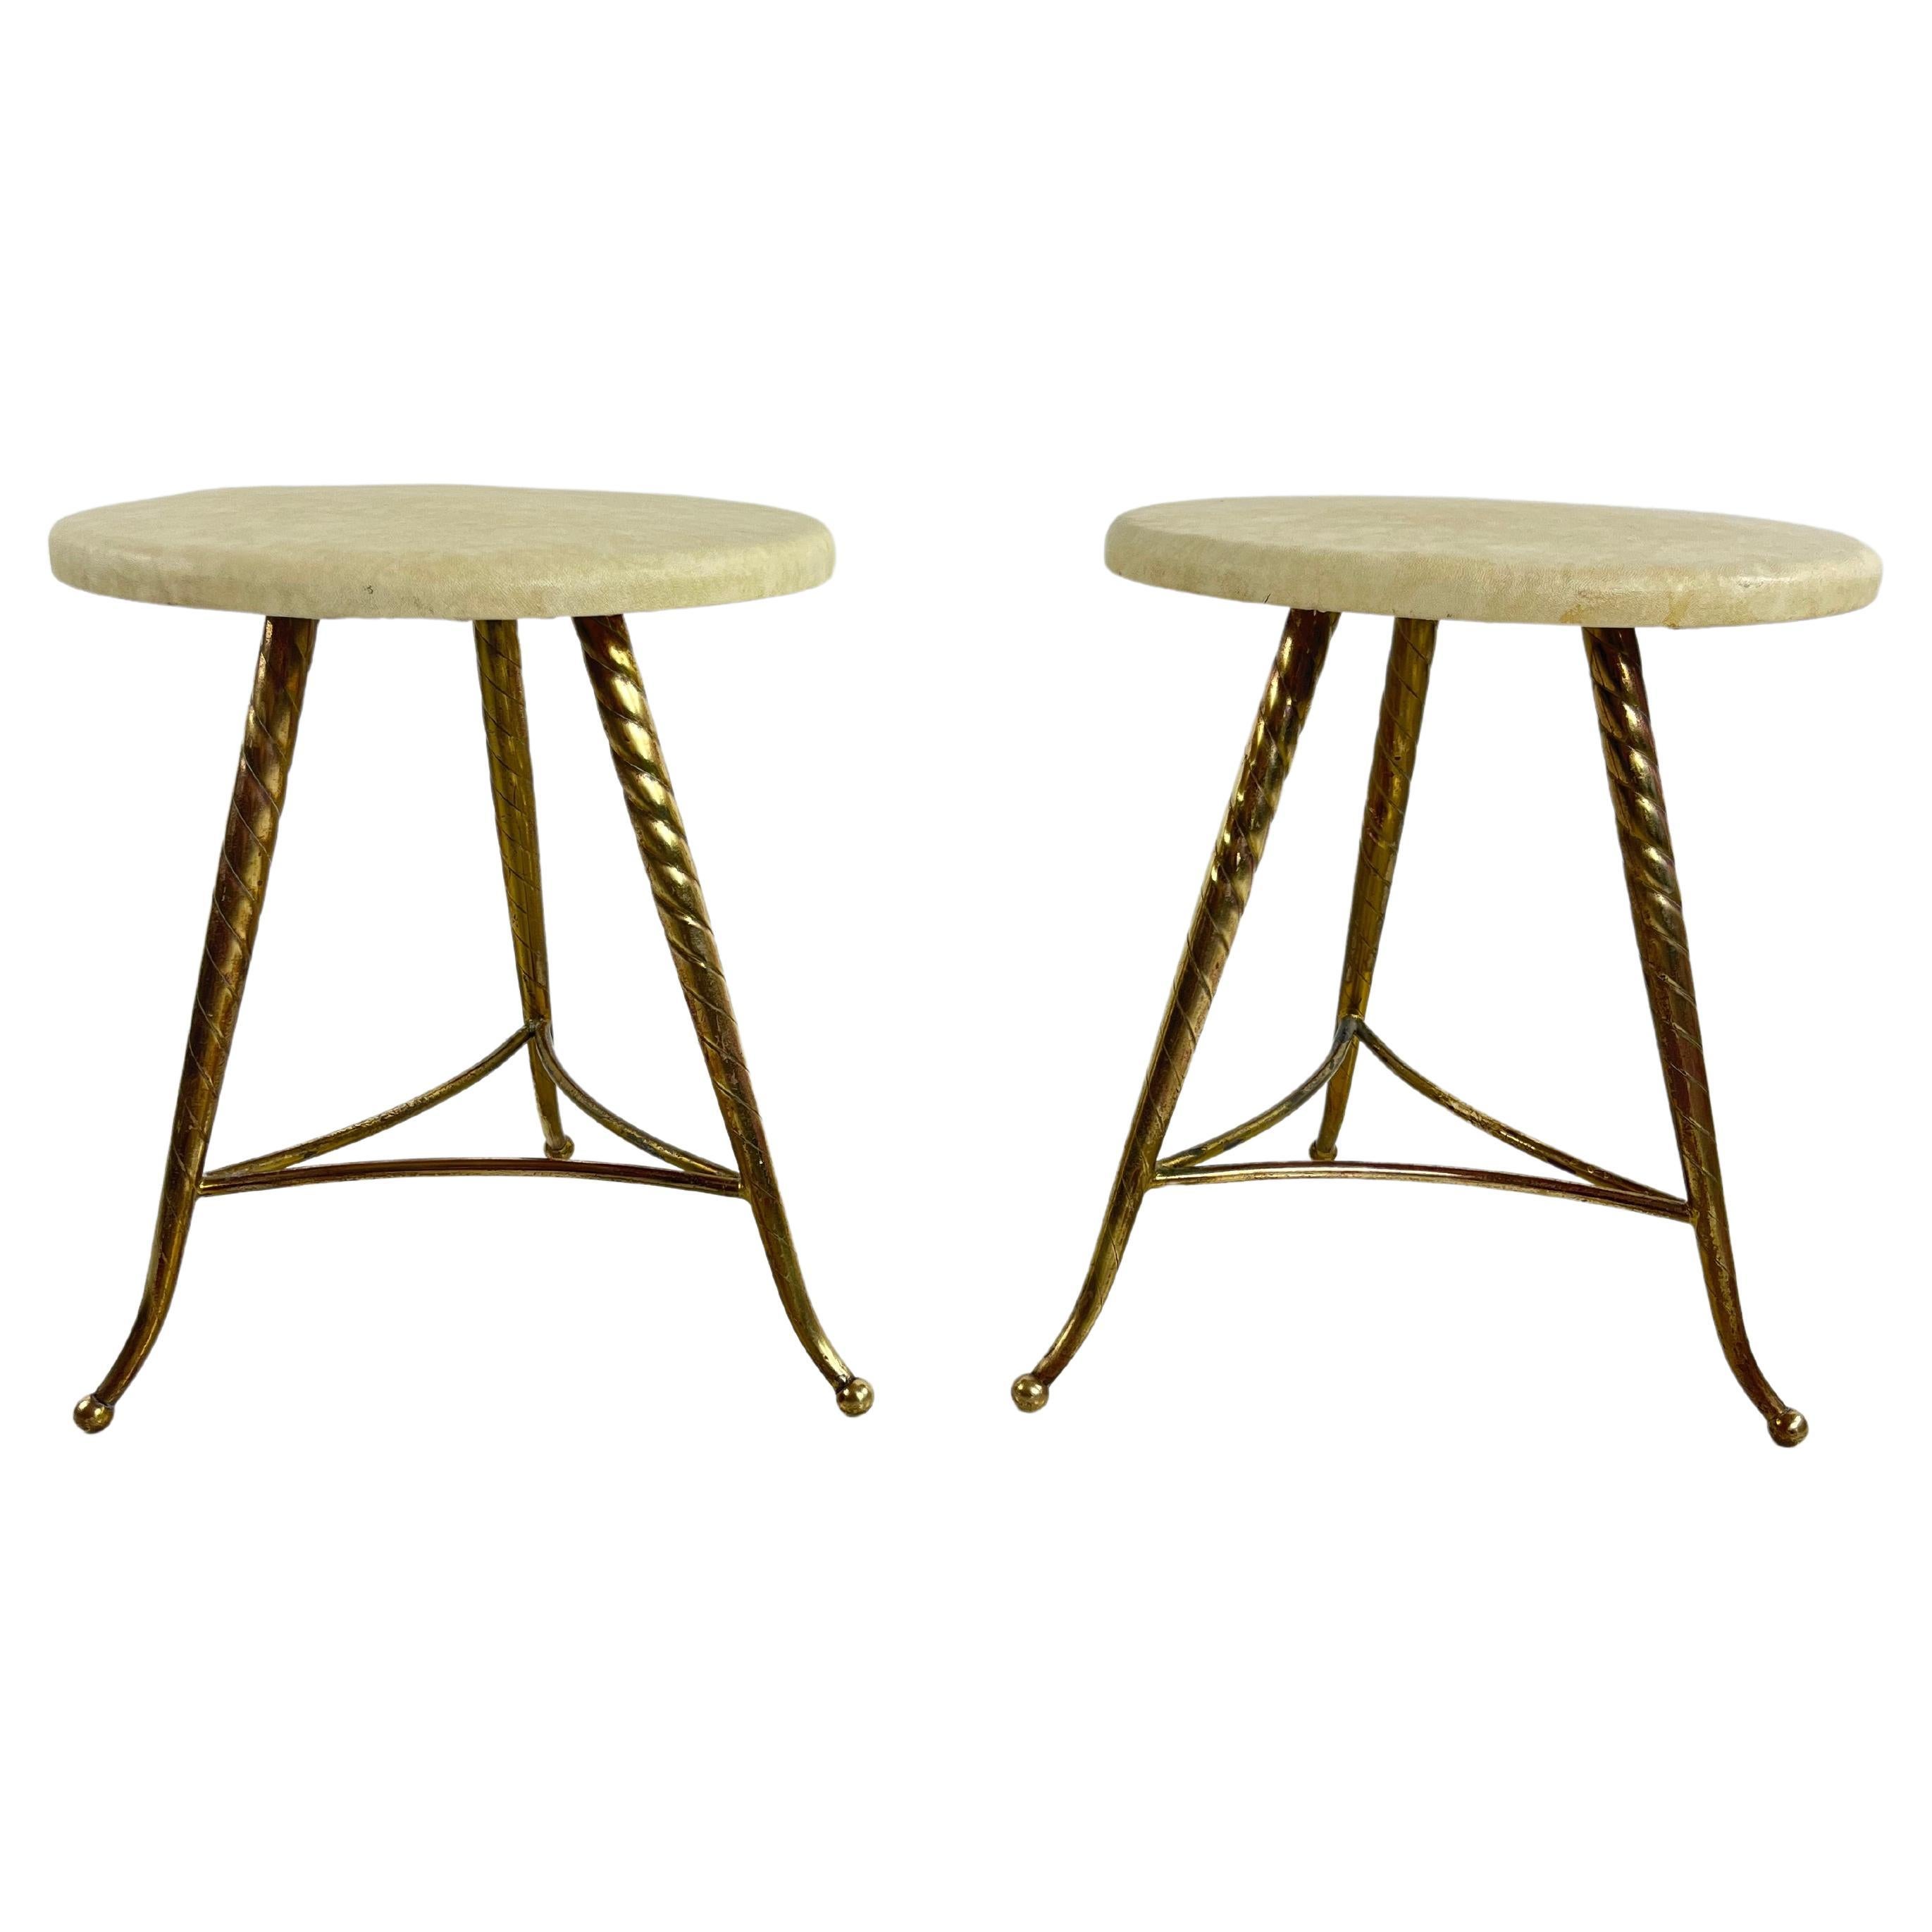 Set of 2 Mid-Century Brass Stools Attributed to Paolo Buffa 1950s